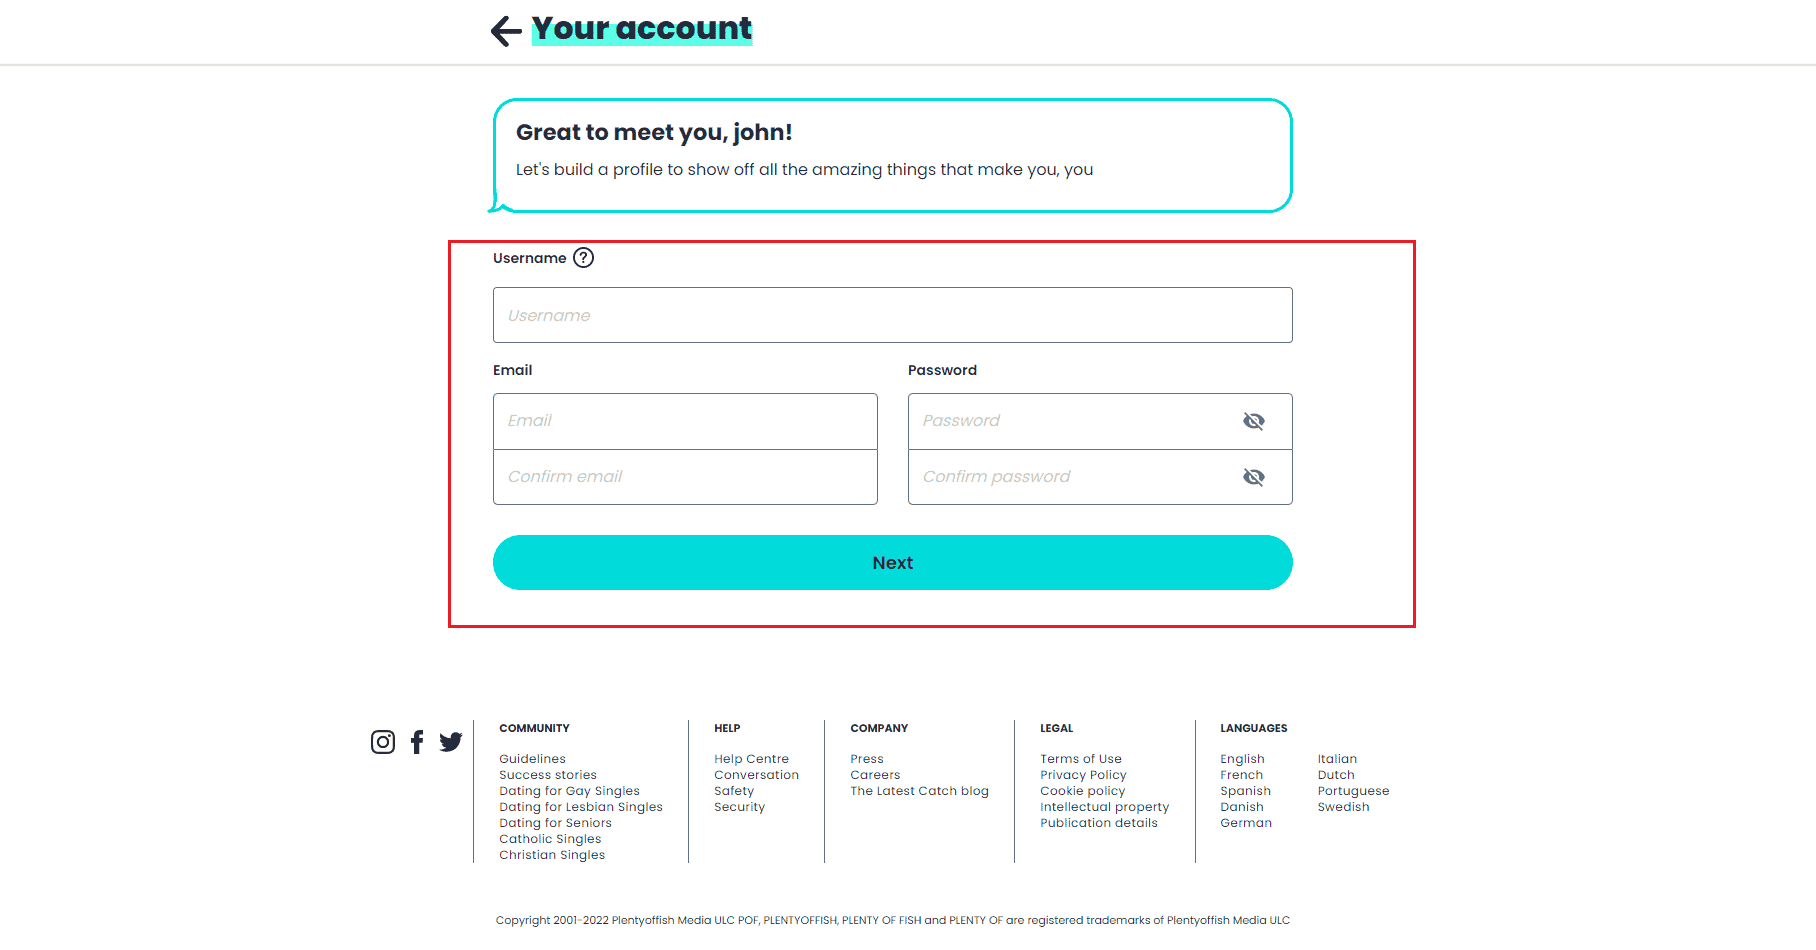 enter username email and password and click Next